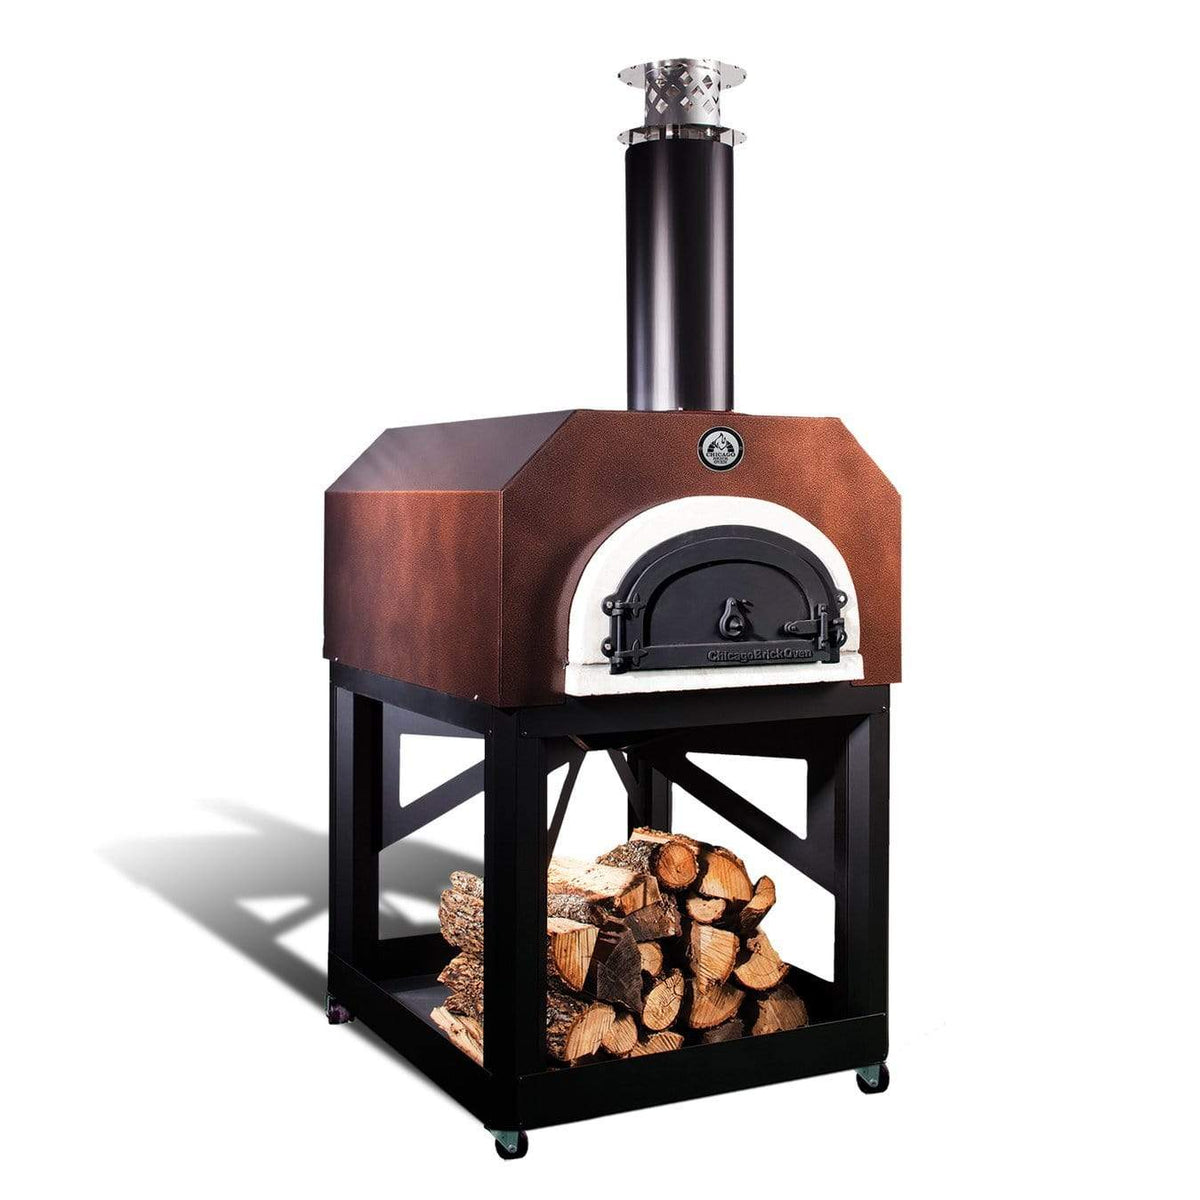 Chicago Brick Oven Pizza Ovens Chicago Brick Oven Mobile Wood Fired Pizza Oven / CBO-750 on Wheeled Cart / CBO-O-MBL-750